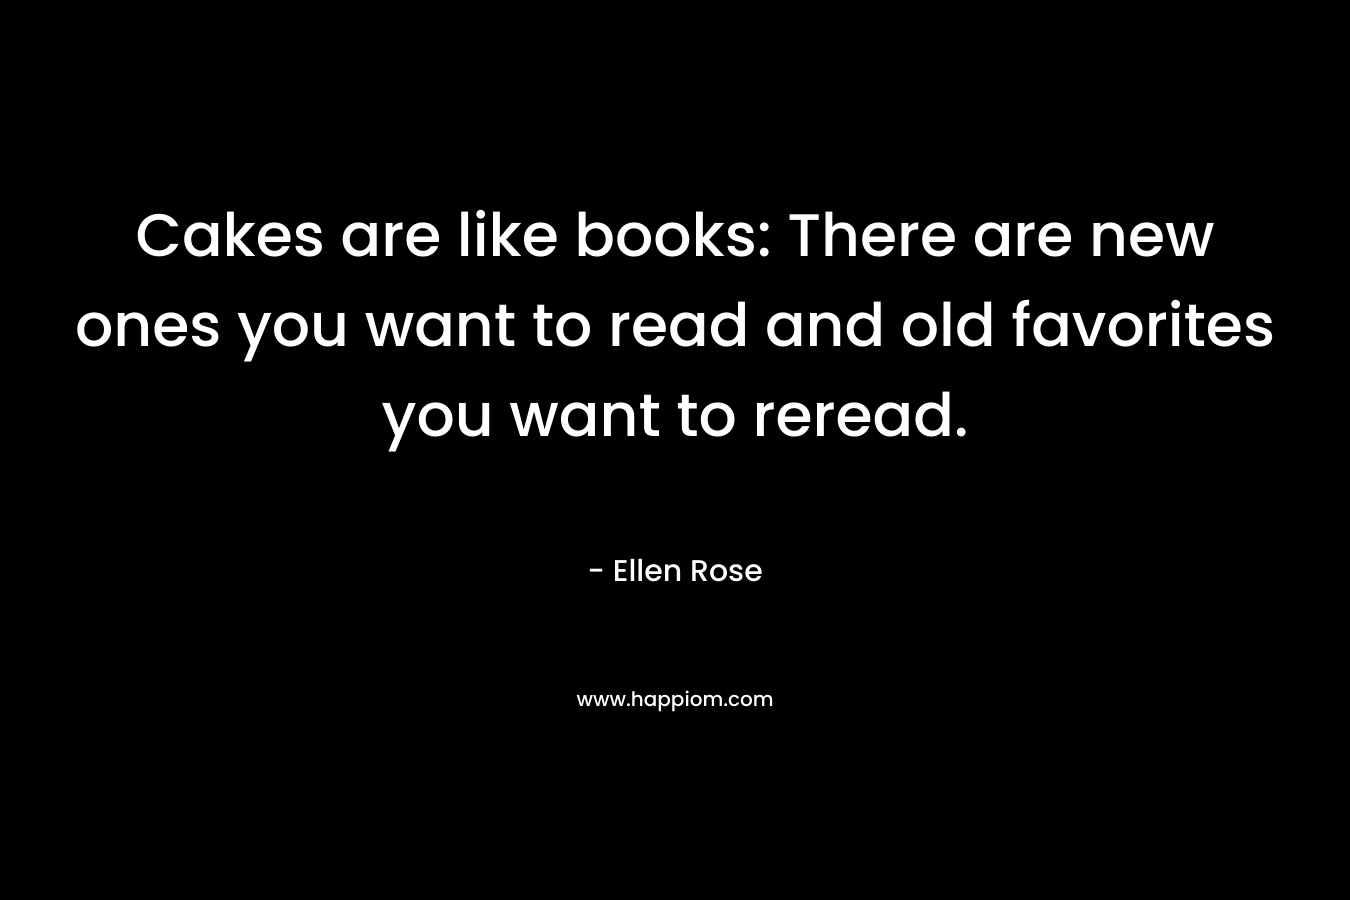 Cakes are like books: There are new ones you want to read and old favorites you want to reread.